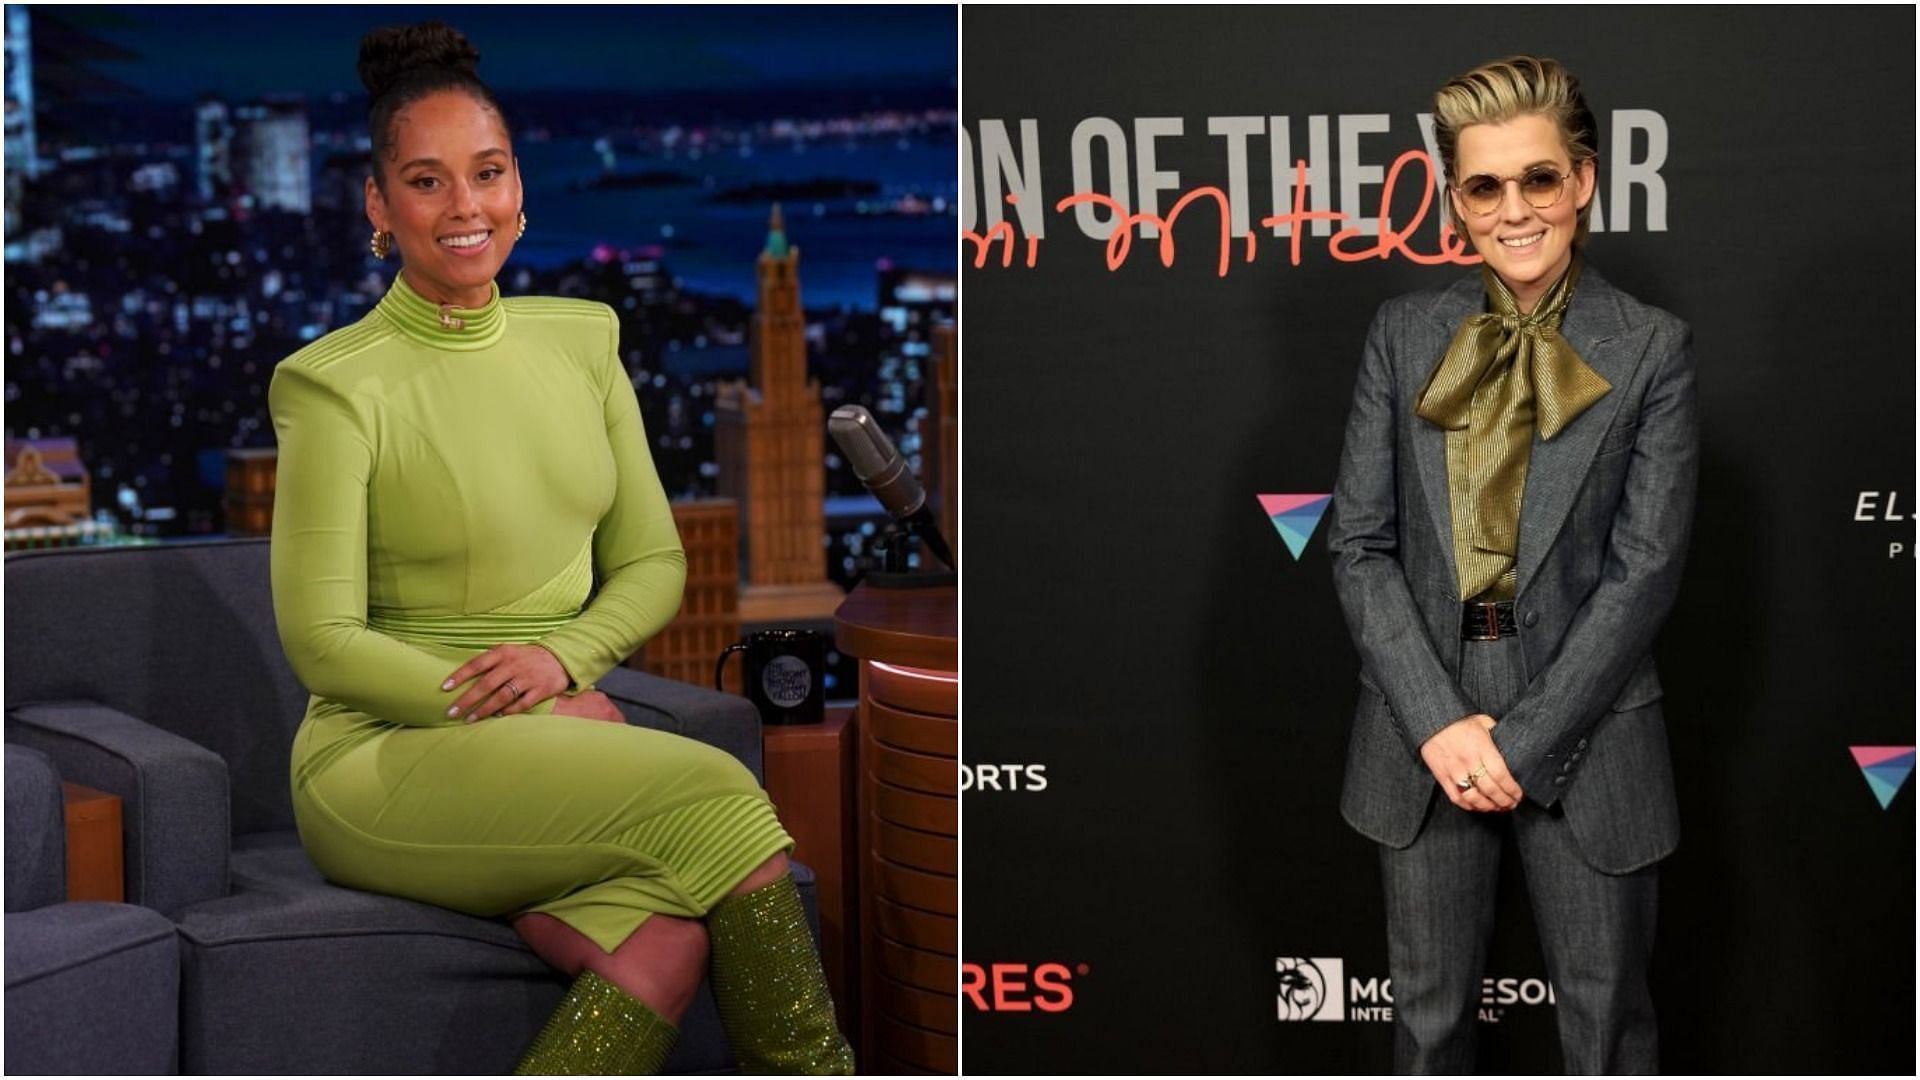 Alicia Keys spoke about her friendship with Brandi Carlile on The Ellen DeGeneres Show (Images via Ryan Muir and Jeff Kravitz/Getty Images)